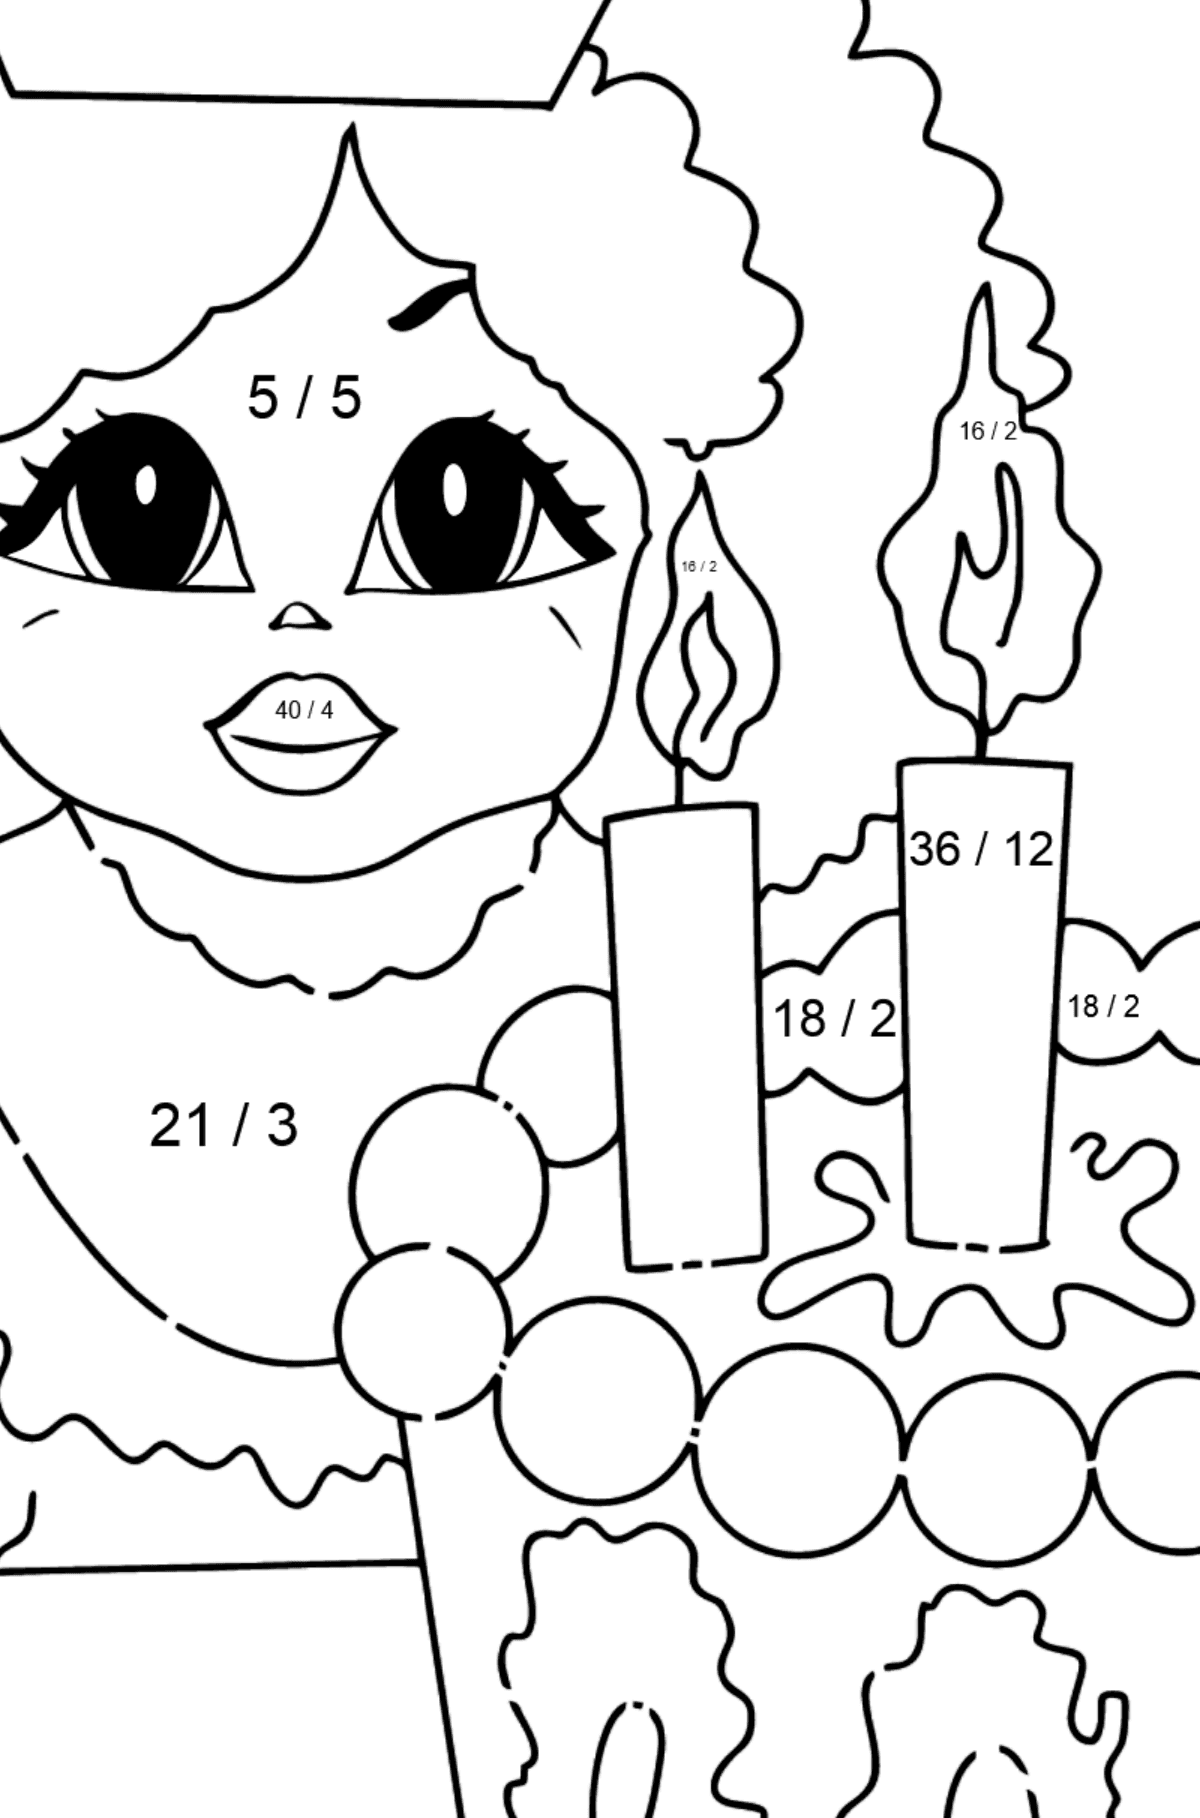 Coloring Page - A Princess with Cake - For Girls - Math Coloring - Division for Kids